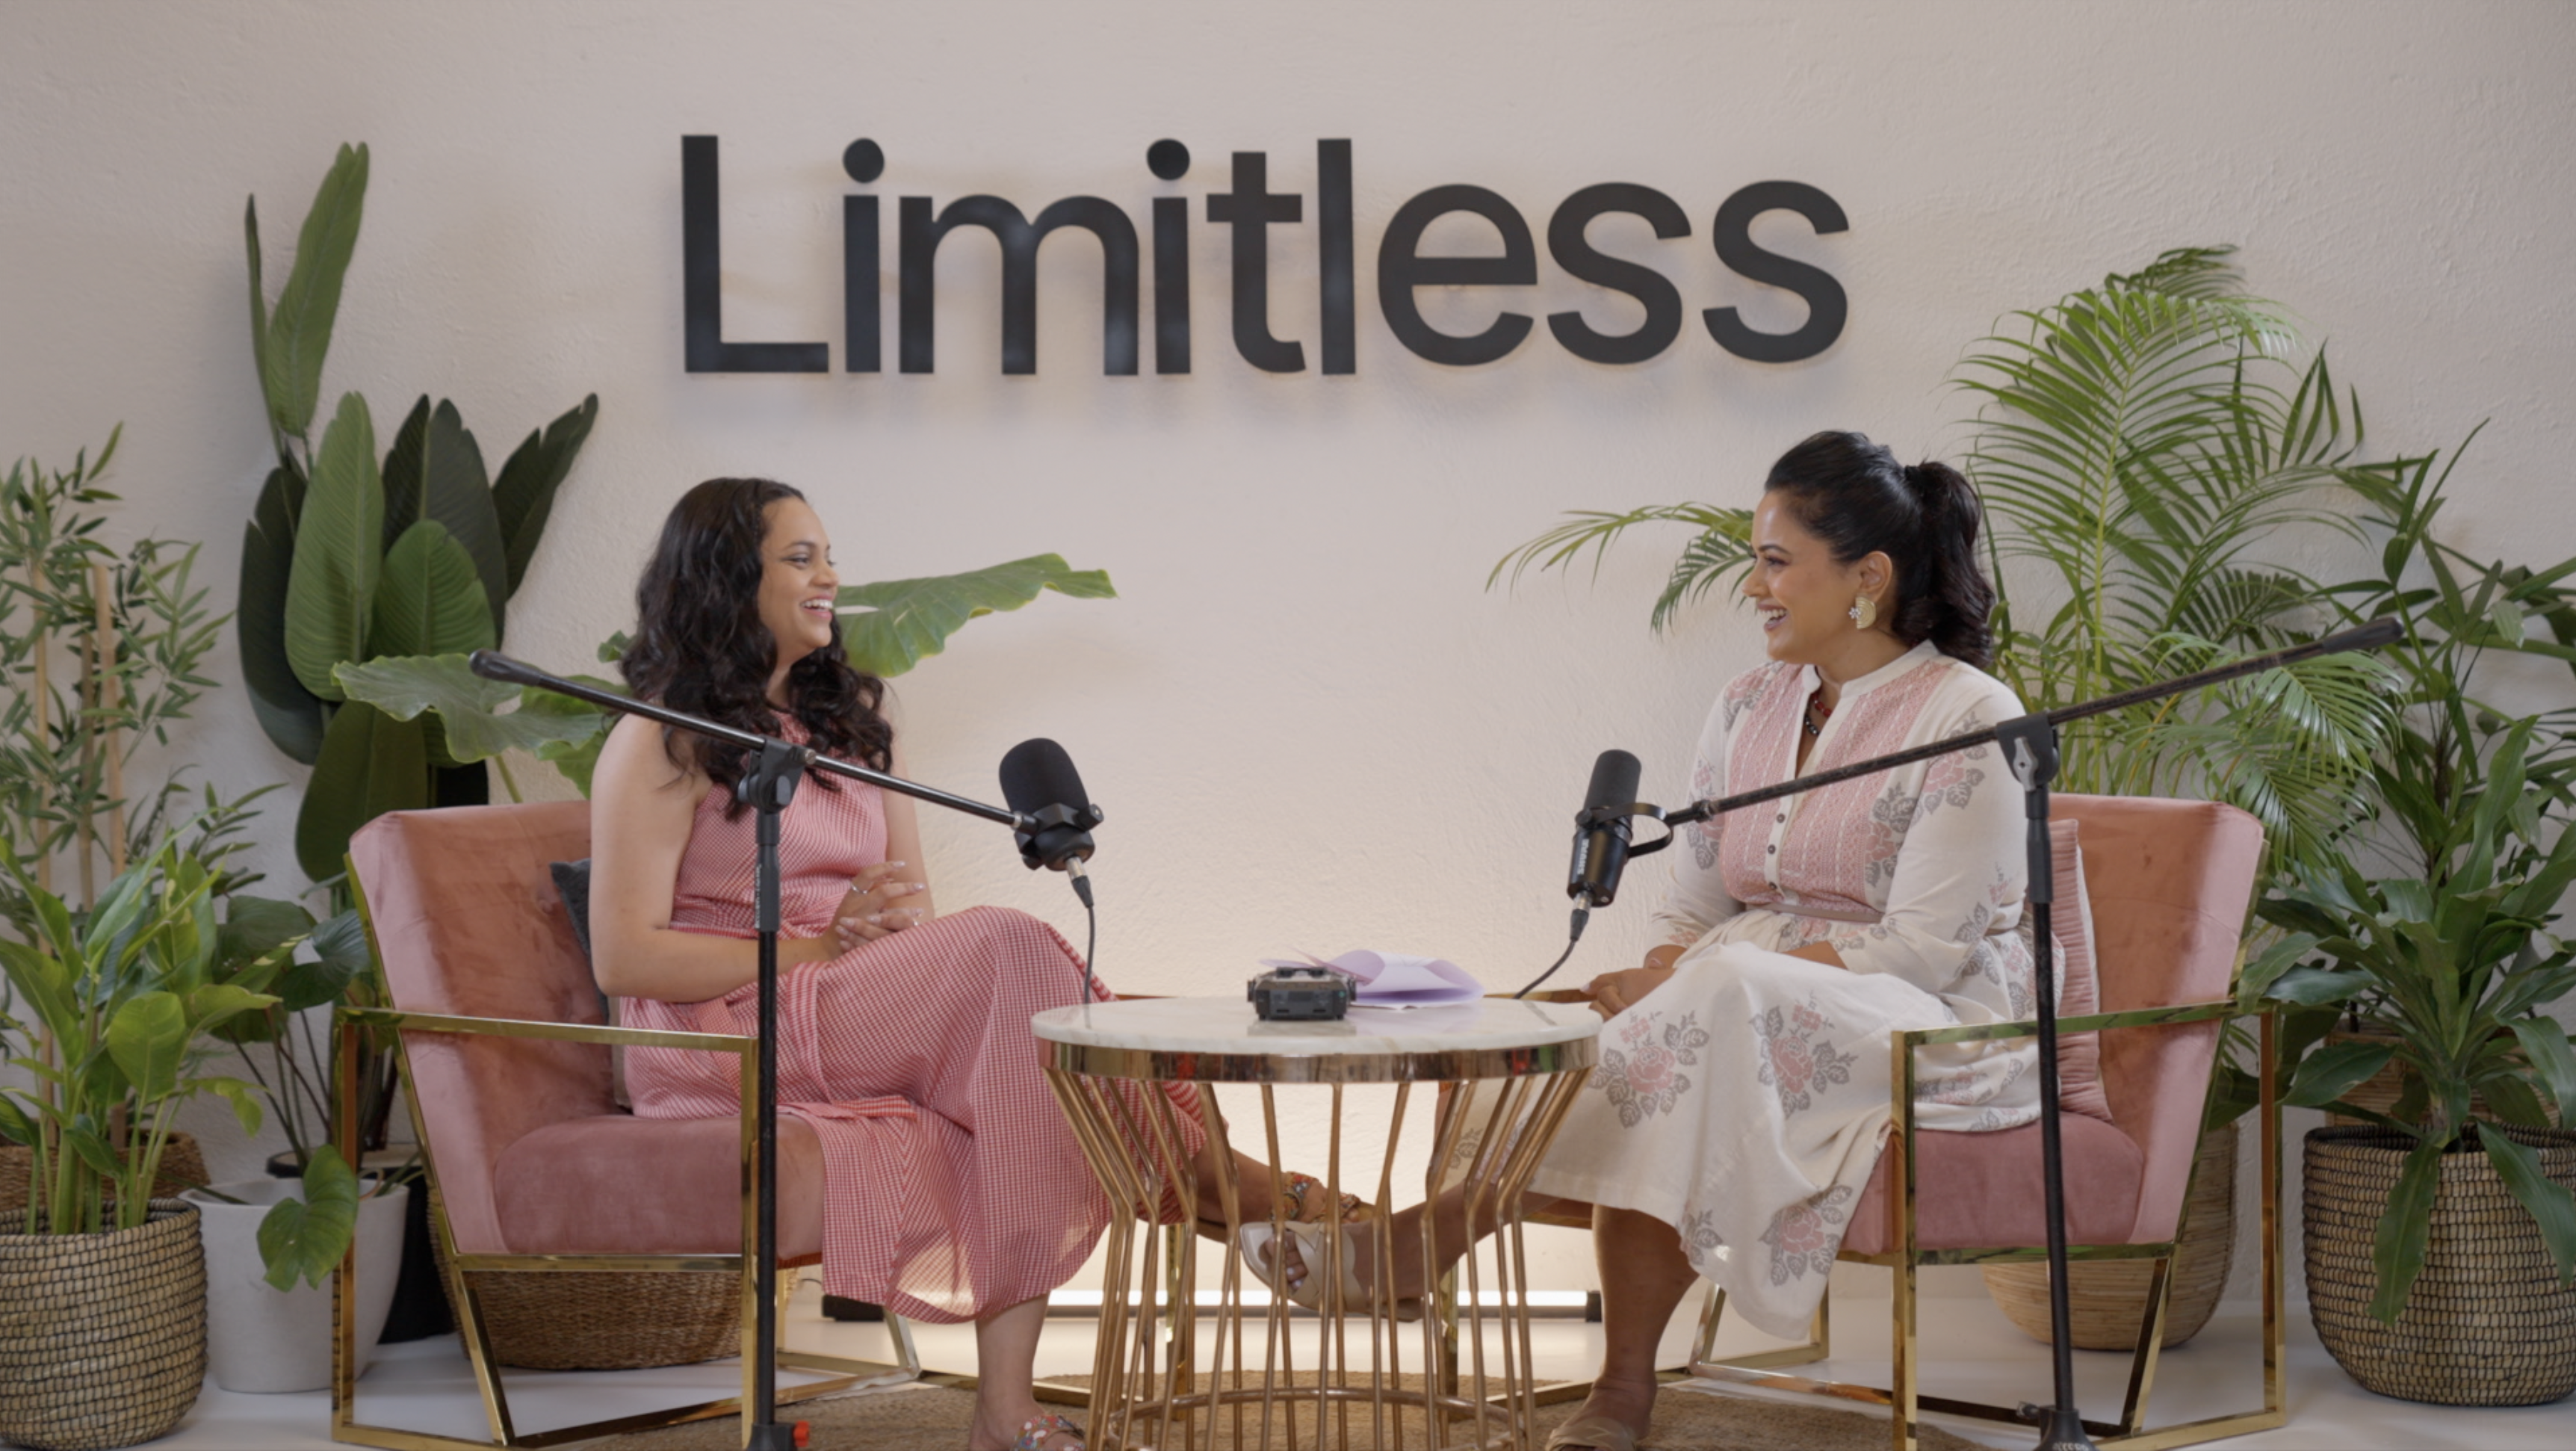 Westside and Sameera Reddy join SrushtiTawade in celebrating the power of being limitless.